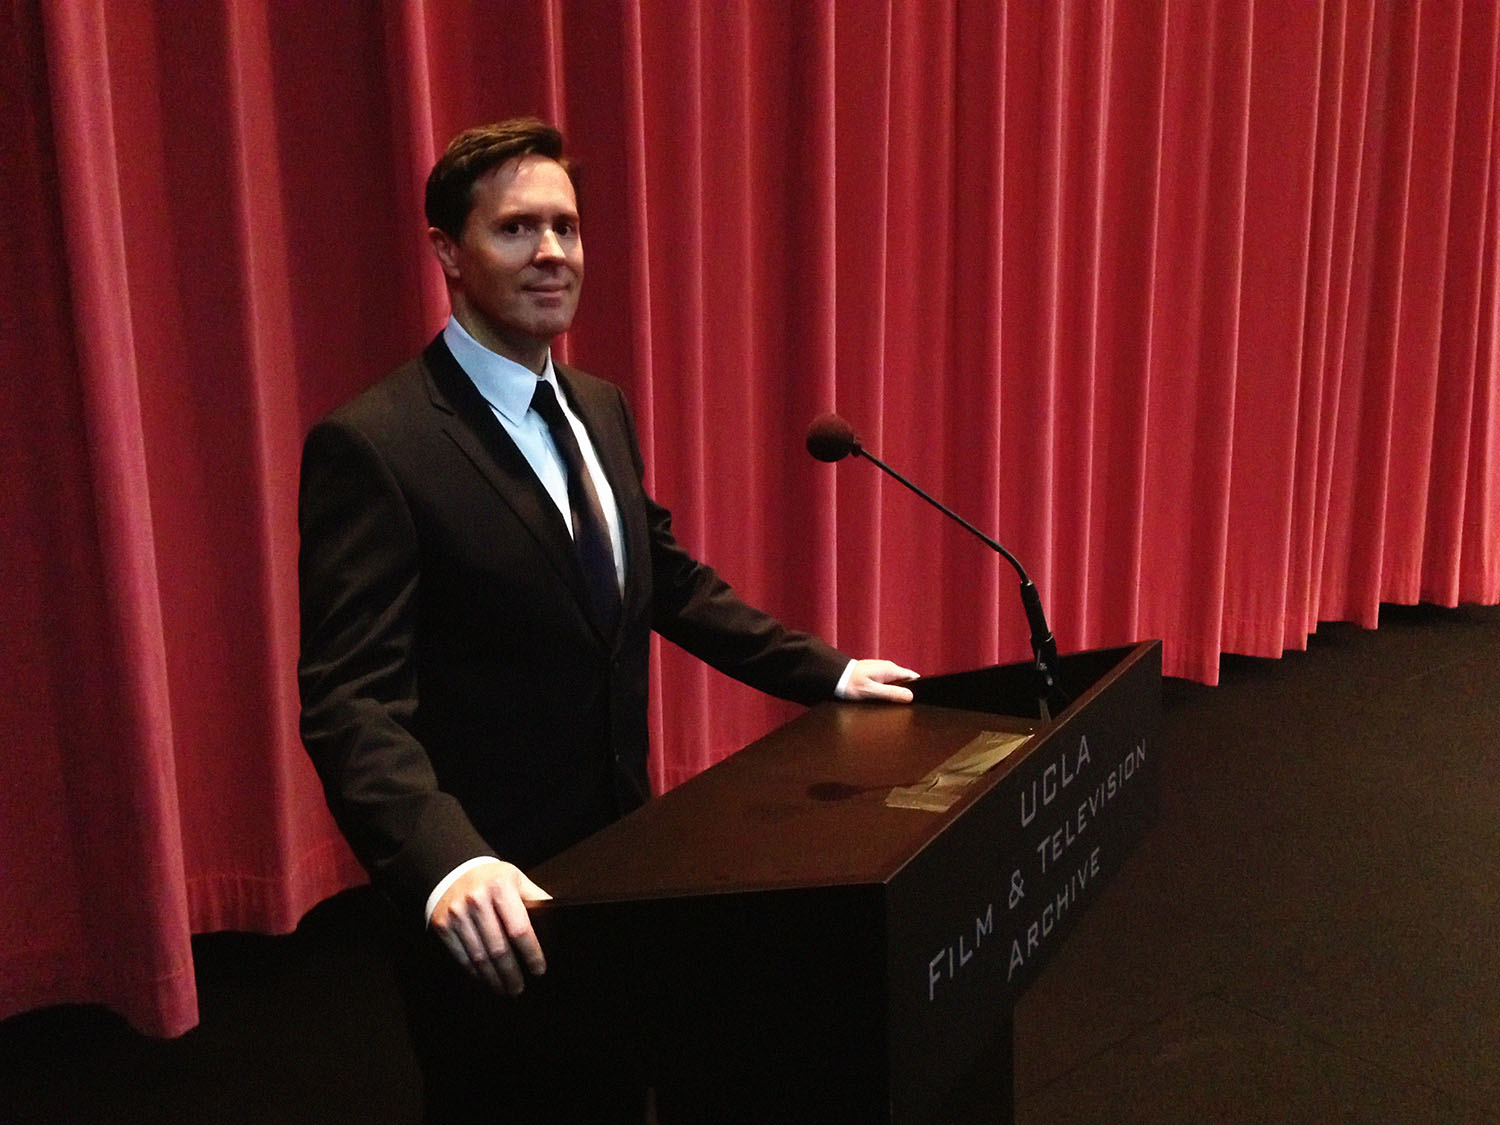 Jeffrey Vance introduces an evening of Mary Pickford films at the UCLA Festival of Preservation, Billy Wilder Theater, Hammer Museum, Westwood, California, March 15, 2015.